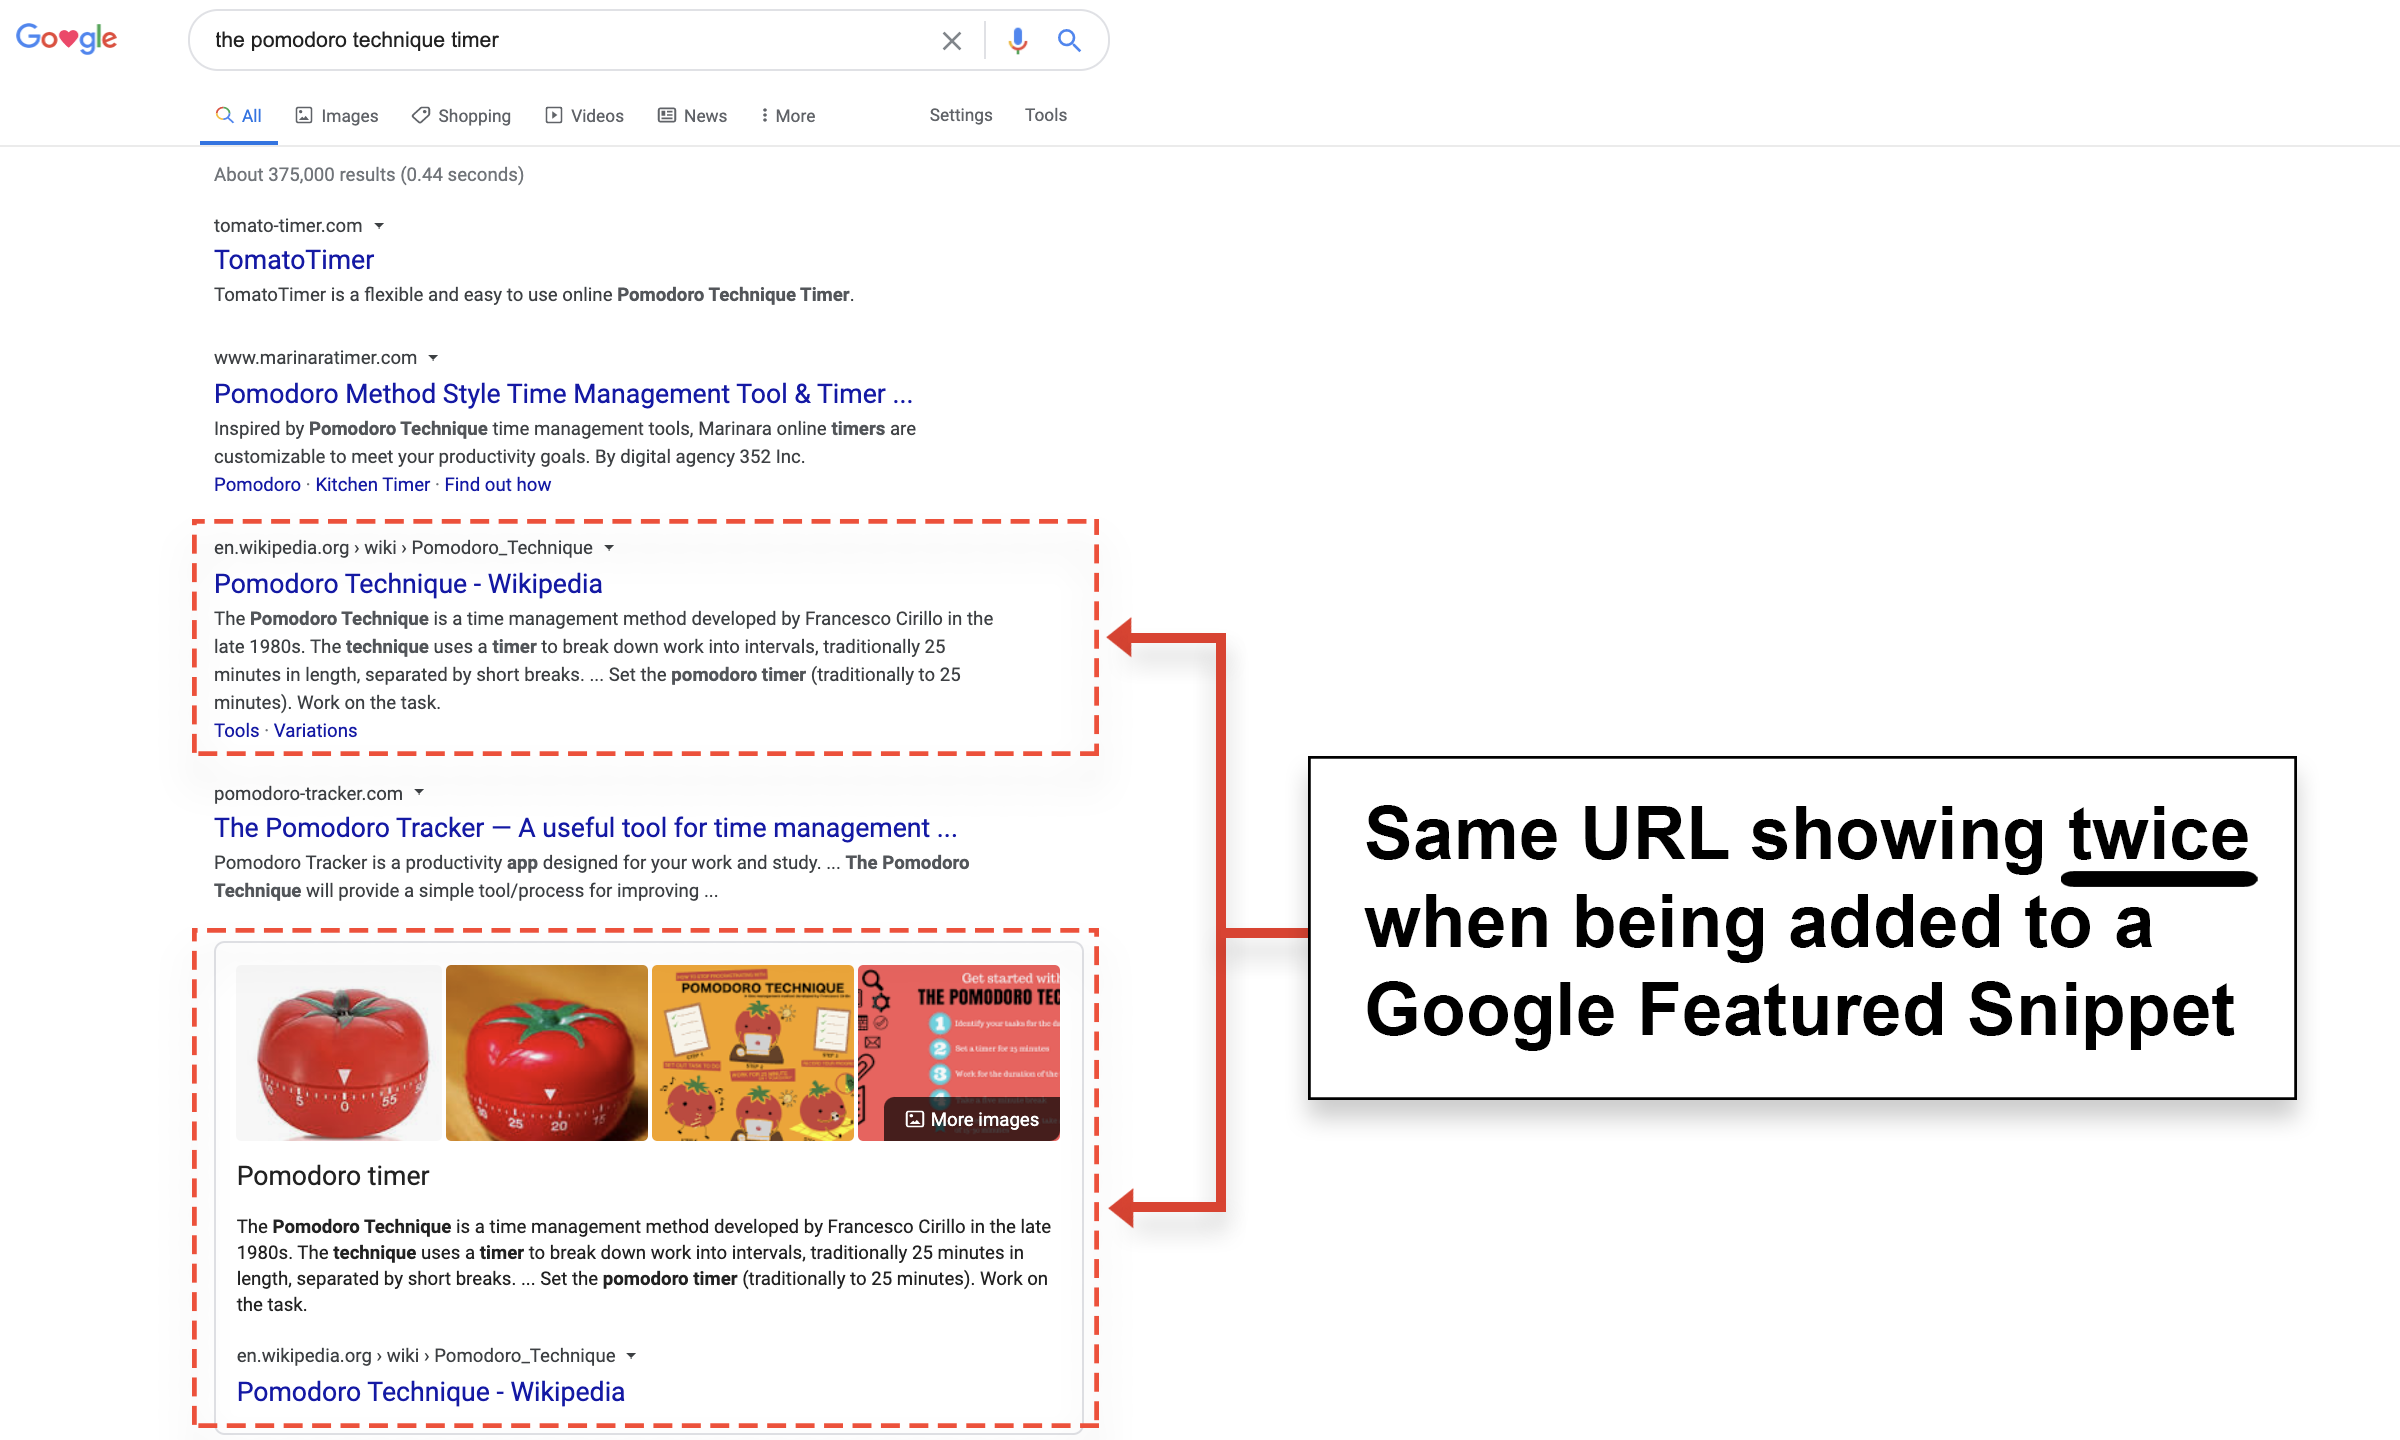 some google featured snippets having second URL repeated